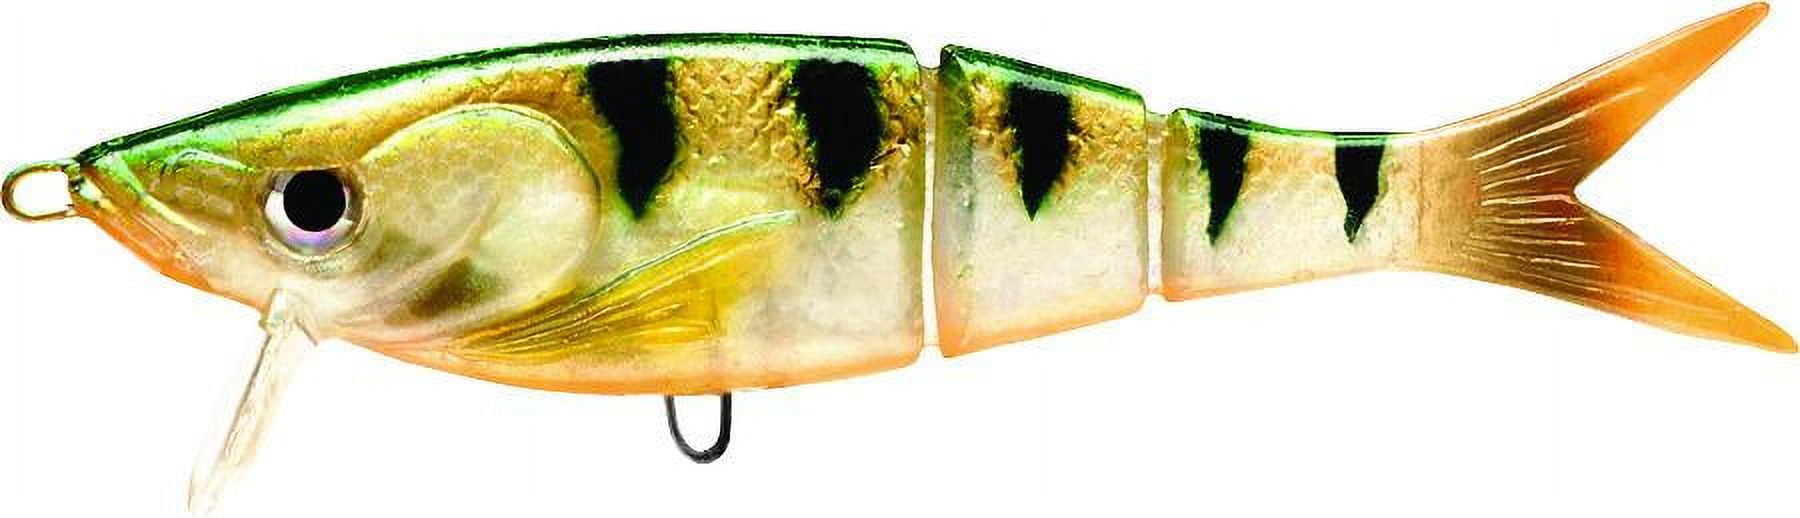 Rubber Skirts Fishing Lures